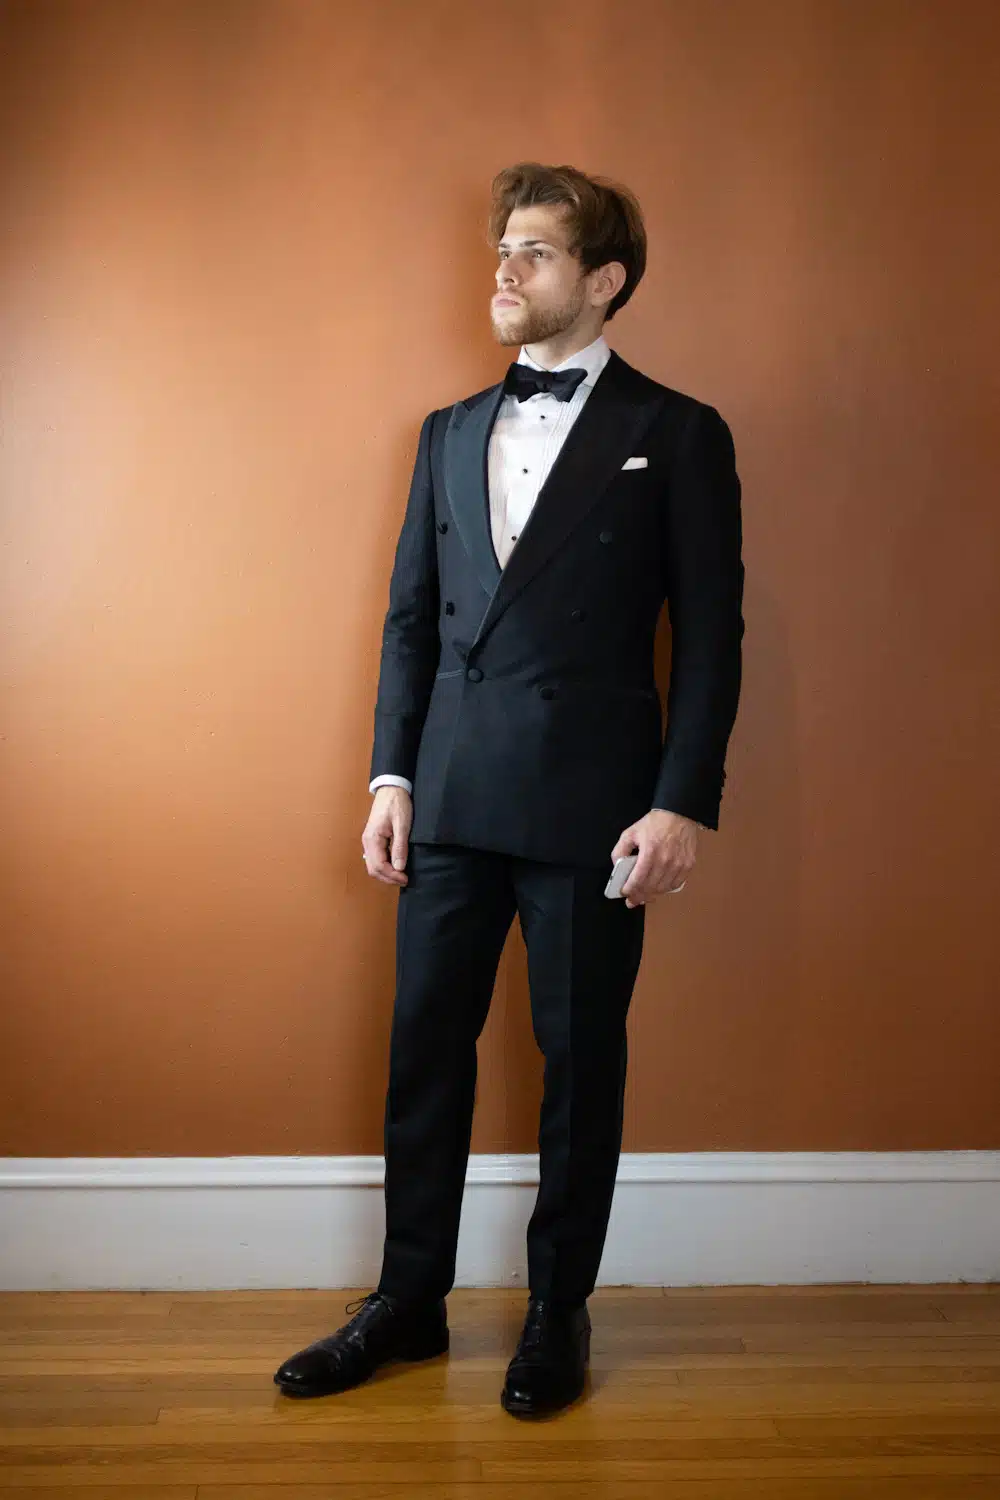 How to Wear a Tuxedo (A Black Tie Guide for Men) - The Modest Man